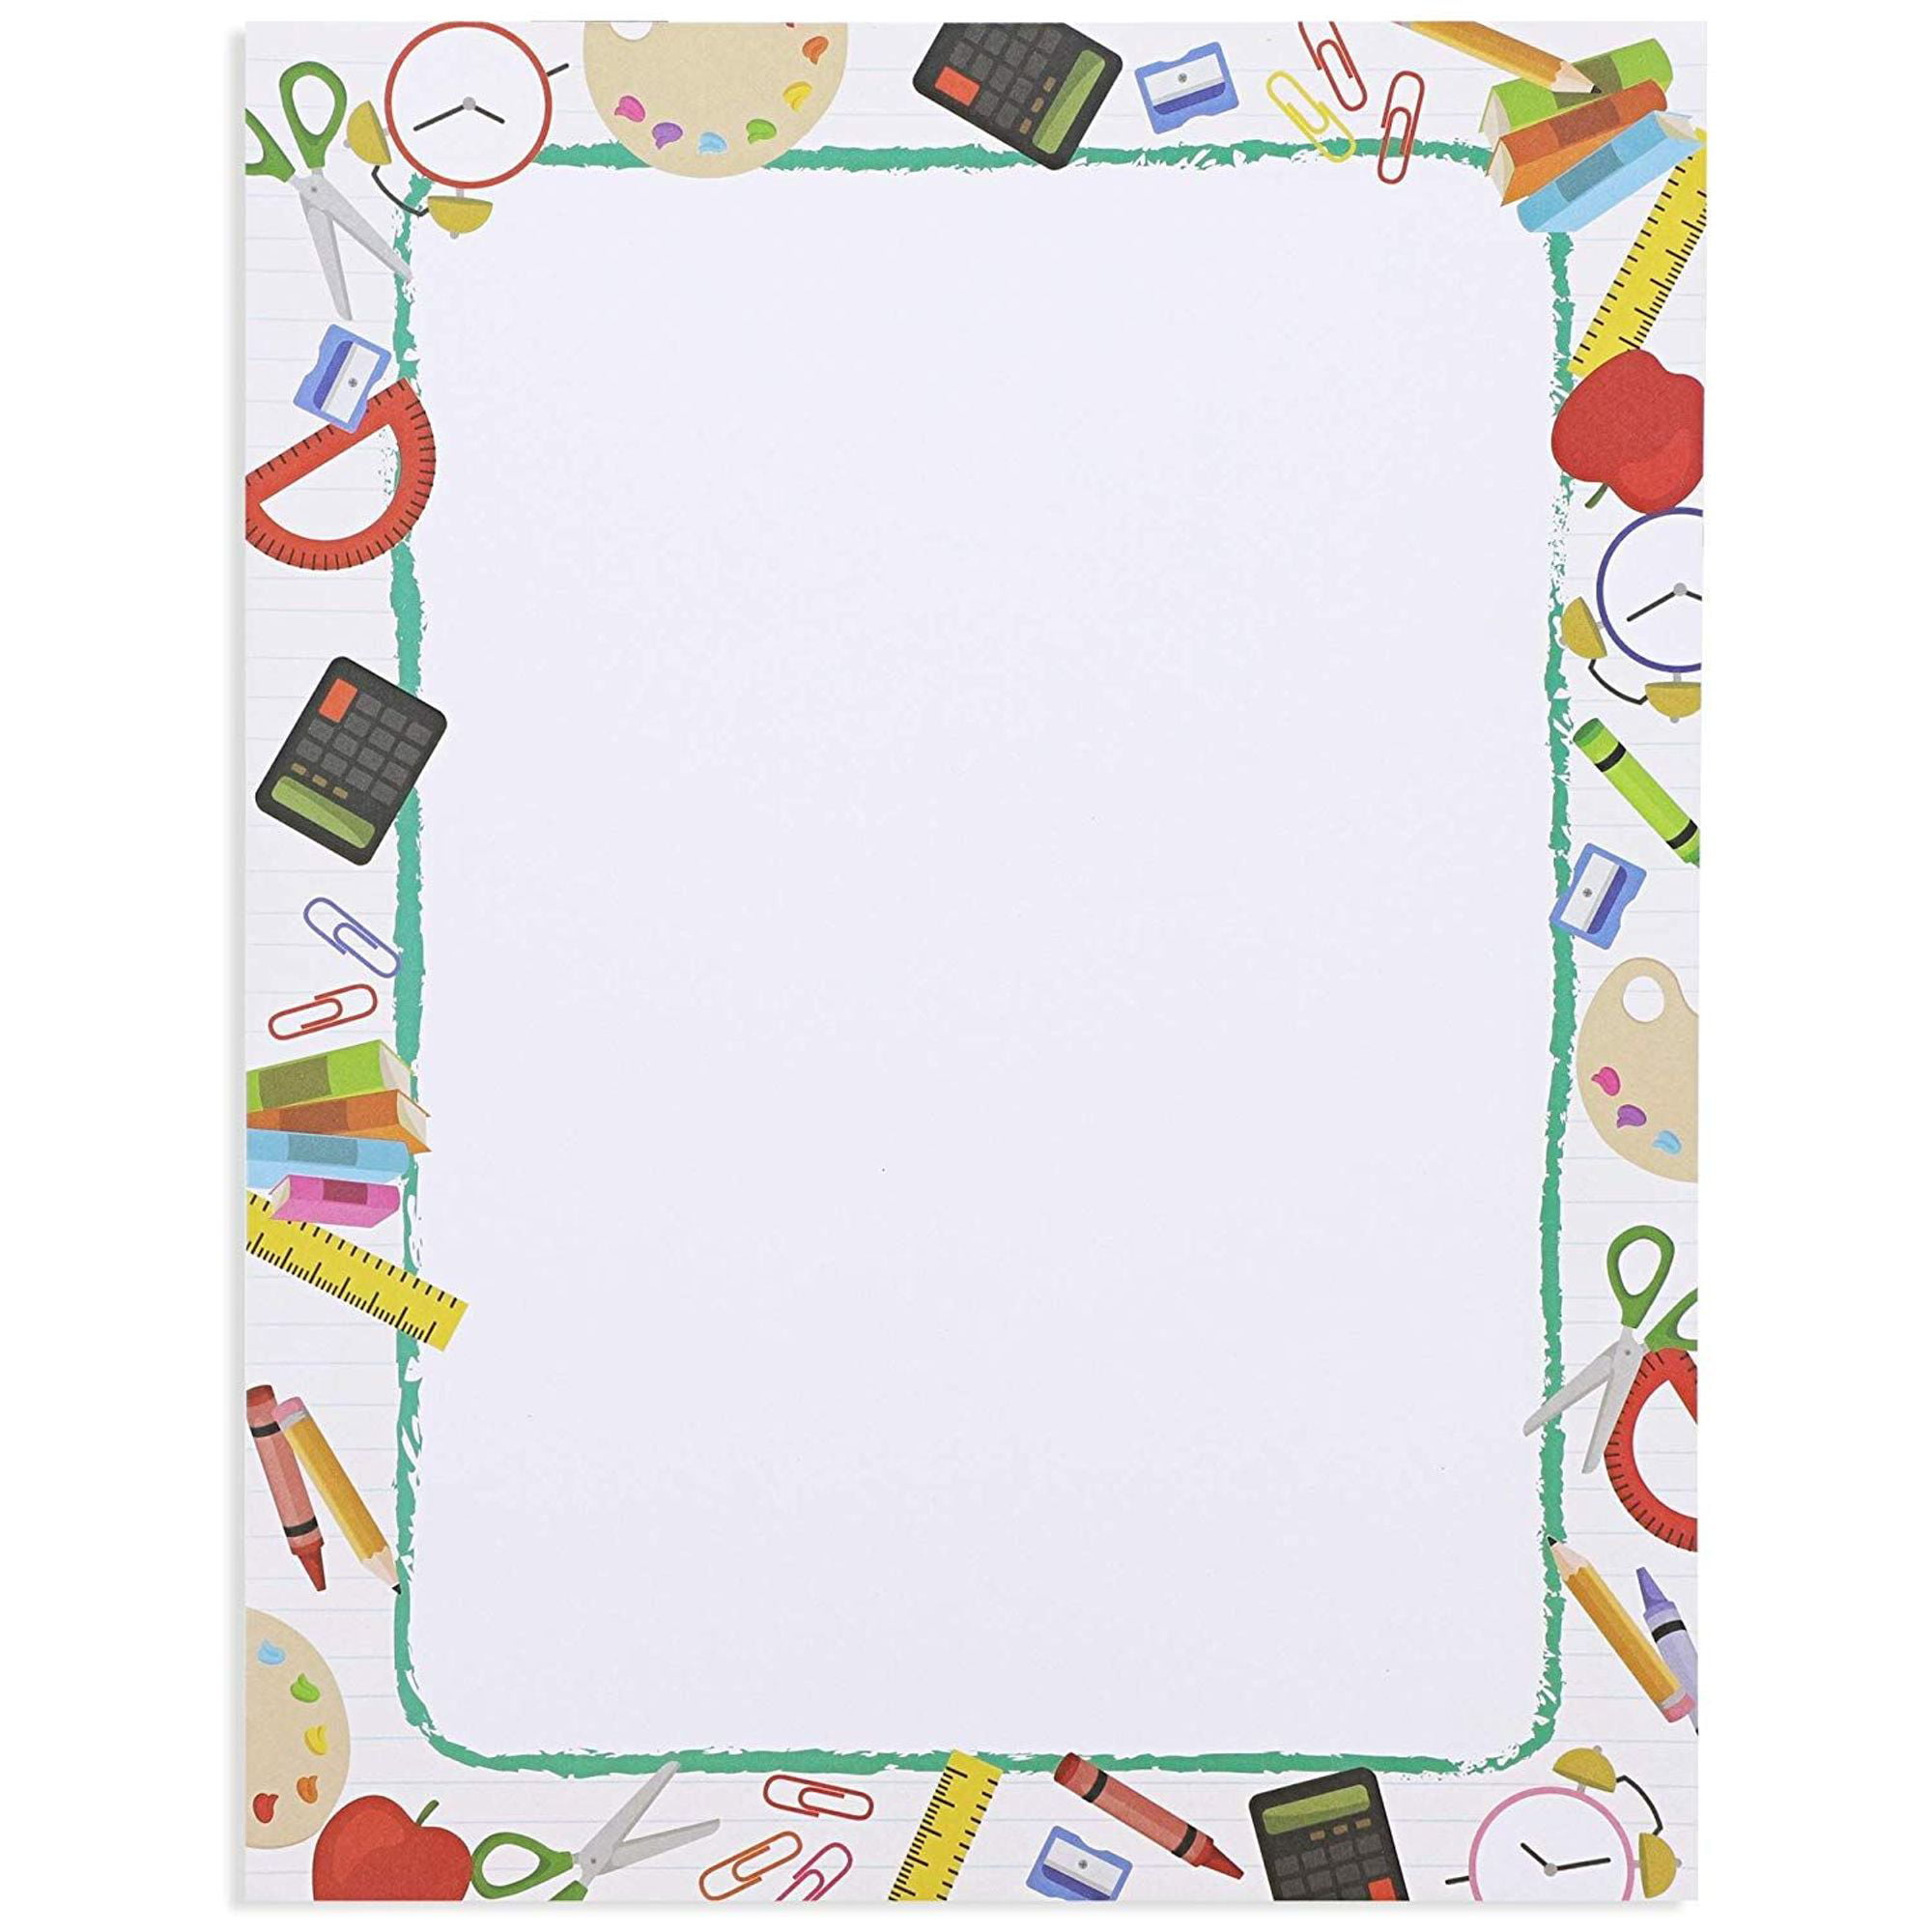 96 count letterhead stationery paper with border for